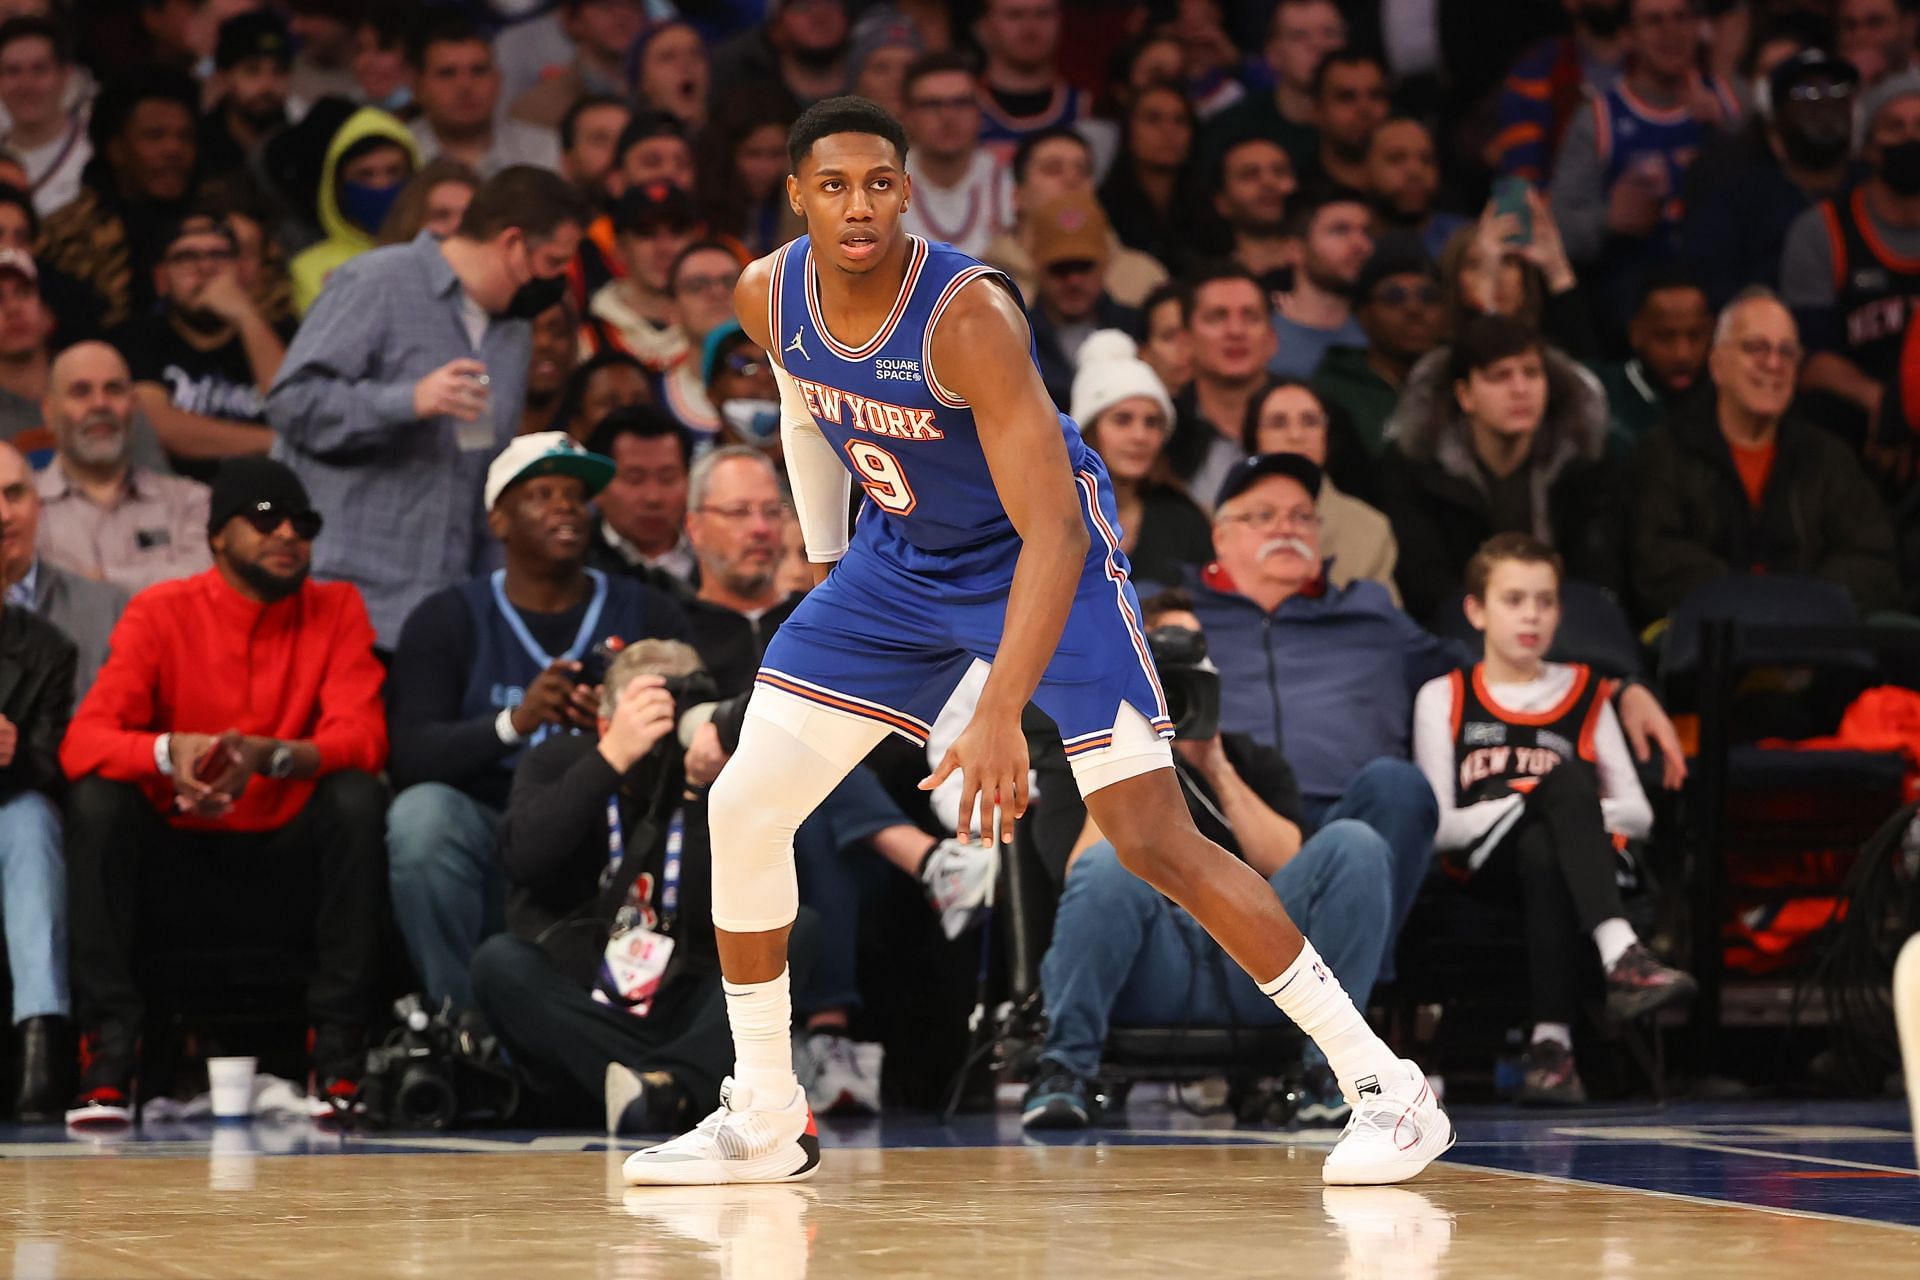 RJ Barrett of the New York Knicks looks on against the Memphis Grizzlies on Wednesday at Madison Square Garden in New York City.